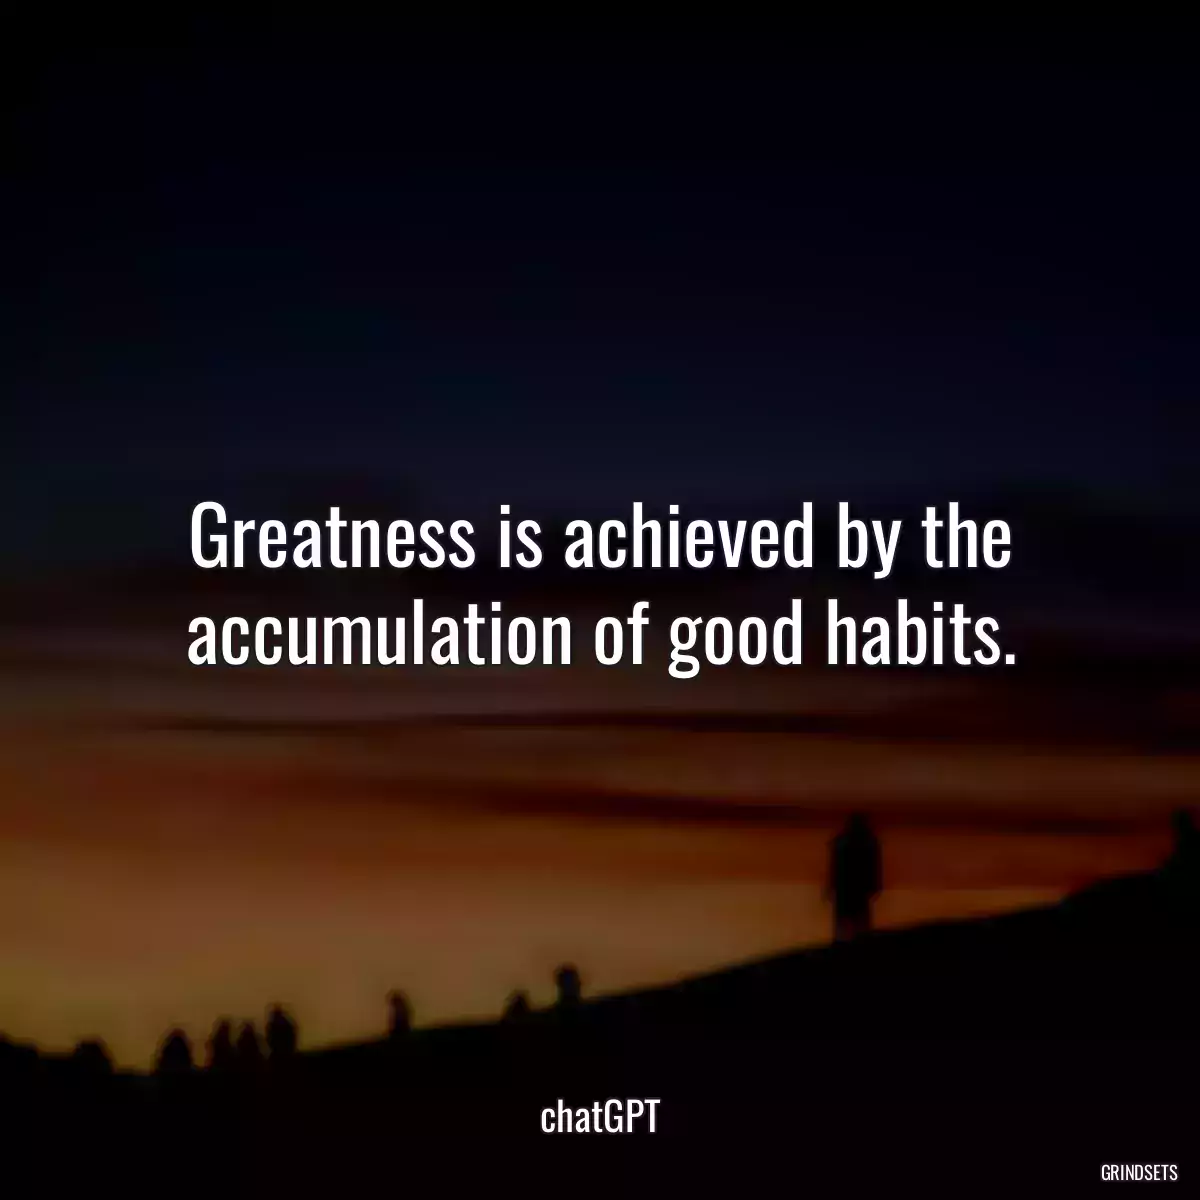 Greatness is achieved by the accumulation of good habits.